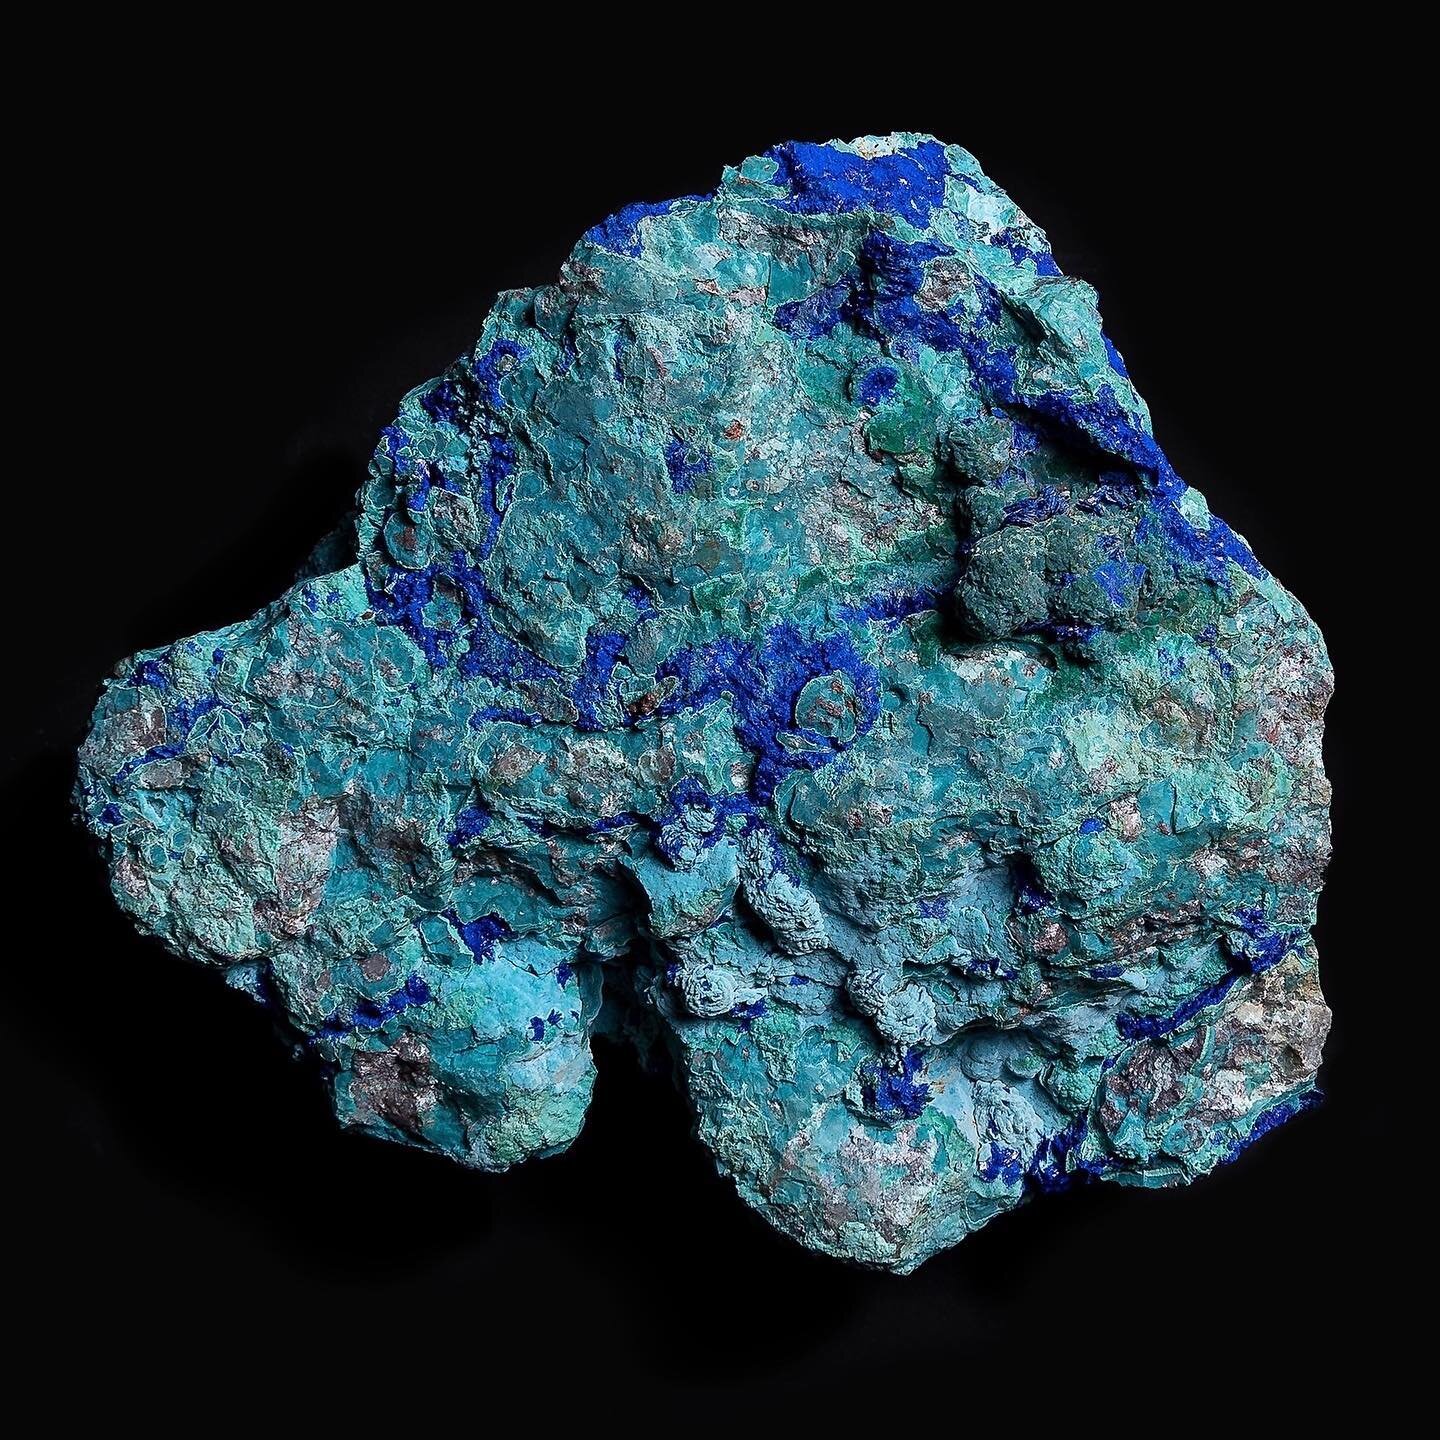 AZURITE with copper encrusted platform 
(arial view of rock sculpture by BDS)

4.25&rdquo; x 6&rdquo; x 5.5&rdquo;
2 LBS

Excavated from the Copper Mountain Mining District, Morenci Arizona 

https://www.bradleyduncan.com/blue-rock-green-wind/azurite